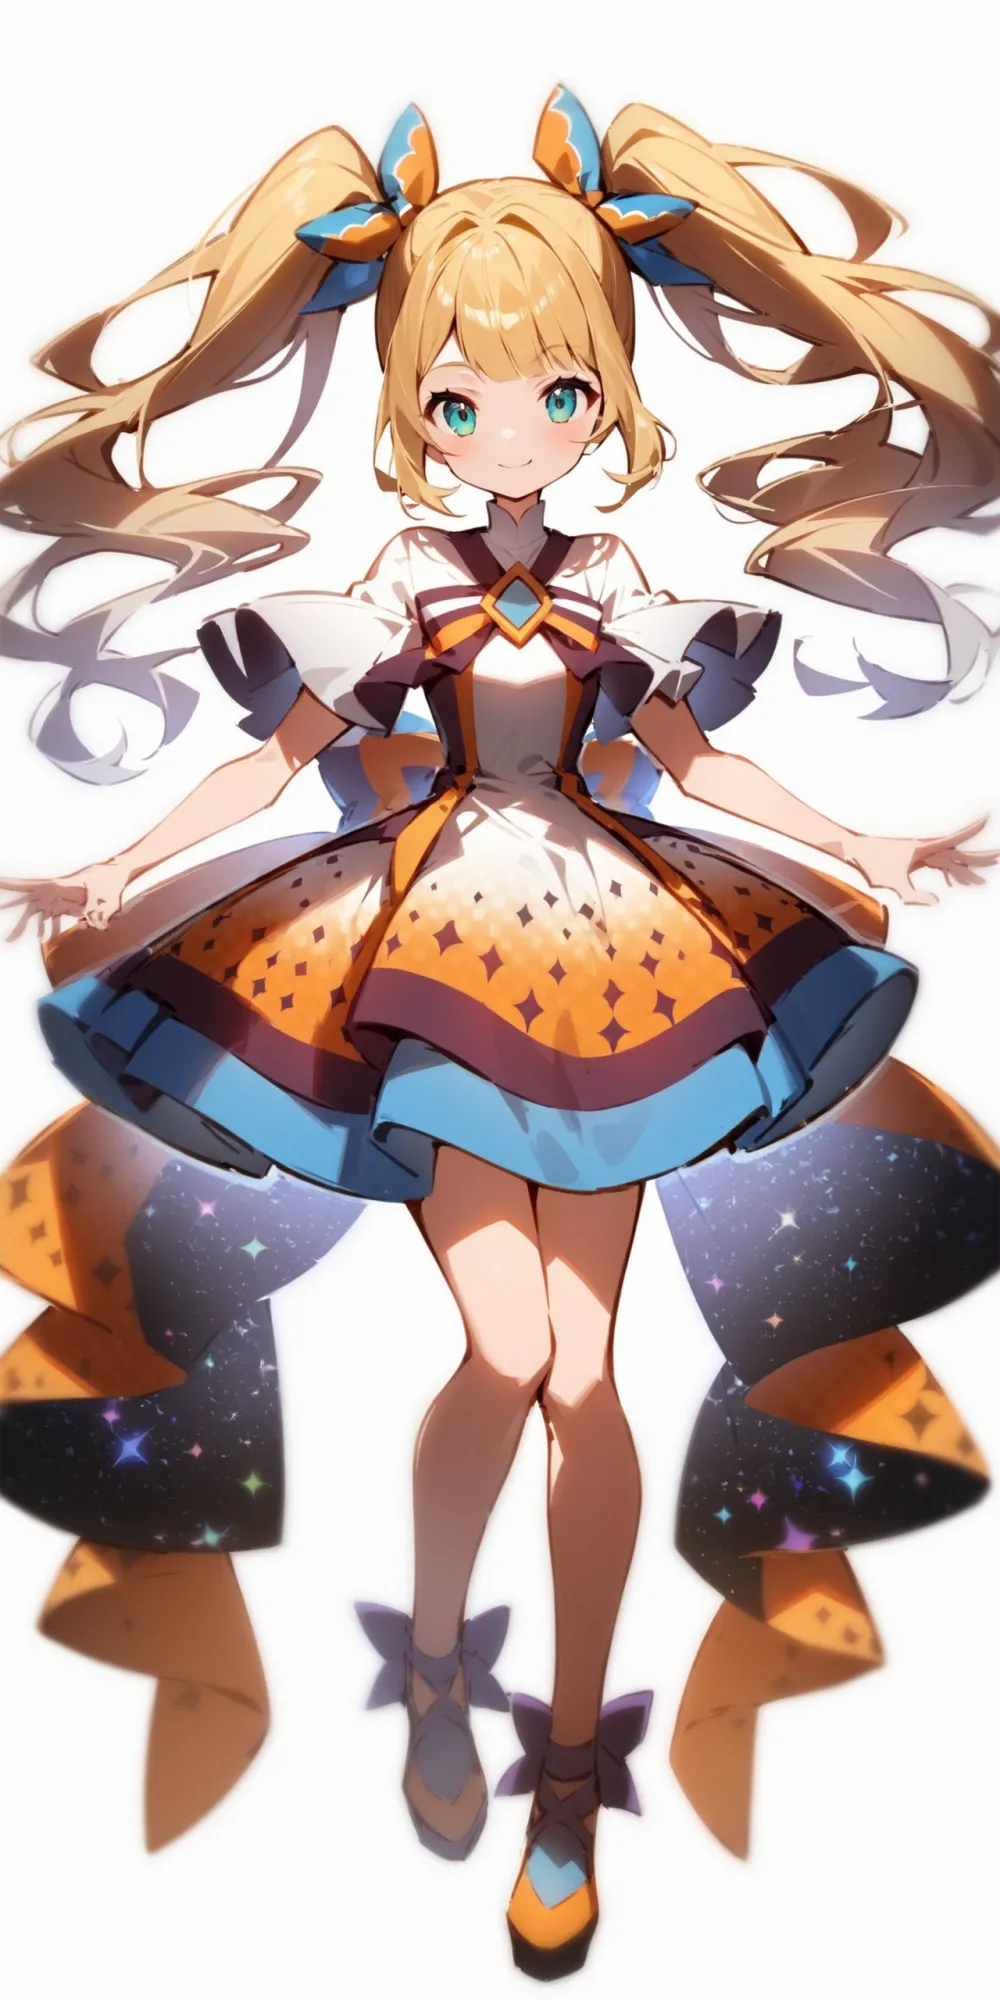 '1girl, print dress, blonde hair, twintails,\nsmile, closed mouth,\ntachi-e, fullbody, white background,\nAlice in glitterworld\nNegative prompt: (worst quality, low quality:1.4), nsfw\nSteps: 35, Sampler: DPM++ 2M SDE Karras, CFG scale: 7, Seed: 1, Size: 640x1280, Model hash: 642b08ca49, Model: ConfusionXL2.0_fp16_vae, VAE hash: 63aeecb90f, VAE: sdxl_vae_0.9.safetensors, Denoising strength: 0.6, Clip skip: 2, Hires upscale: 2, Hires steps: 15, Hires upscaler: ESRGAN_4x, Eta: 0.68, Version: v1.7.0'